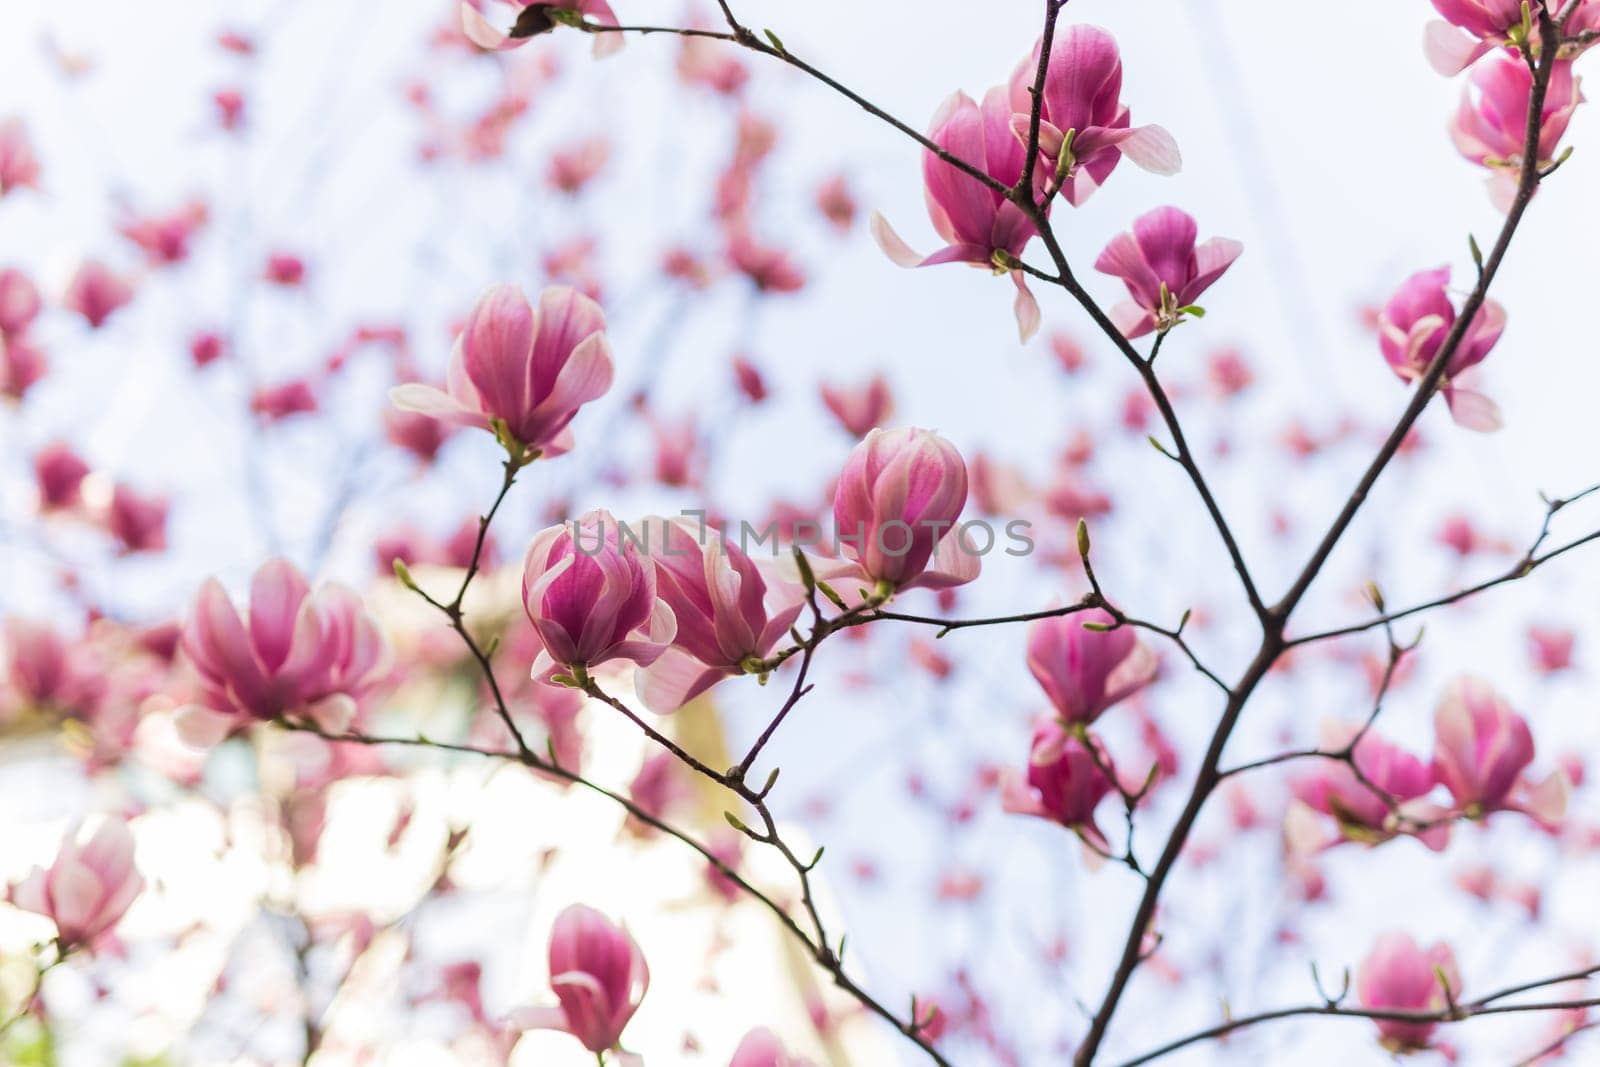 Blooming magnolia tree in springtime in city. Magnolia blossom in spring. Copy space and empty place for advertising.